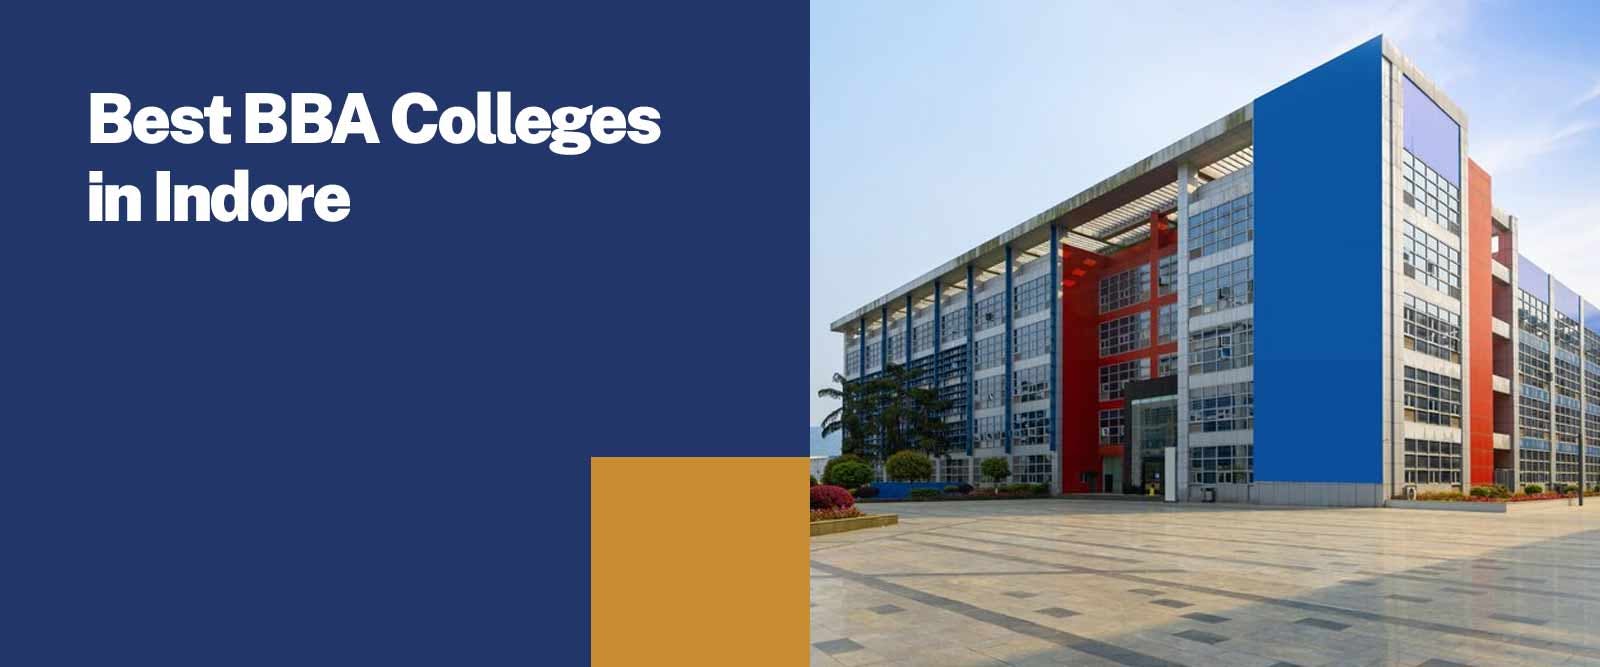 bba colleges indore